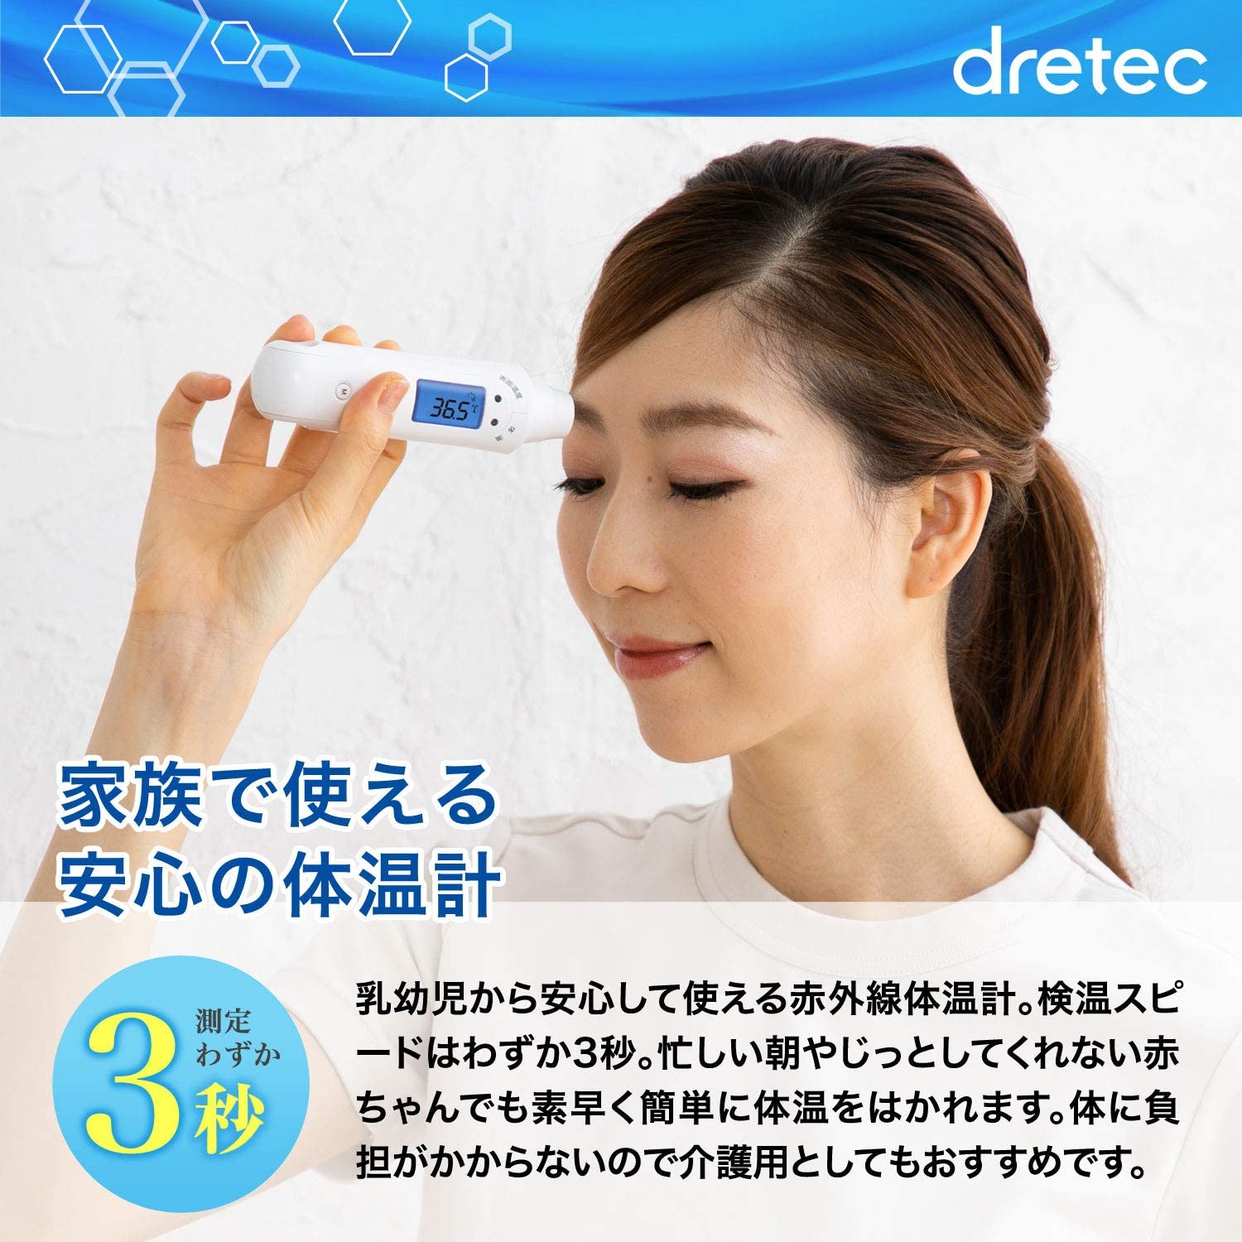 dretec(ドリテック) 非接触スキャン体温計 TO-402の商品画像サムネ2 